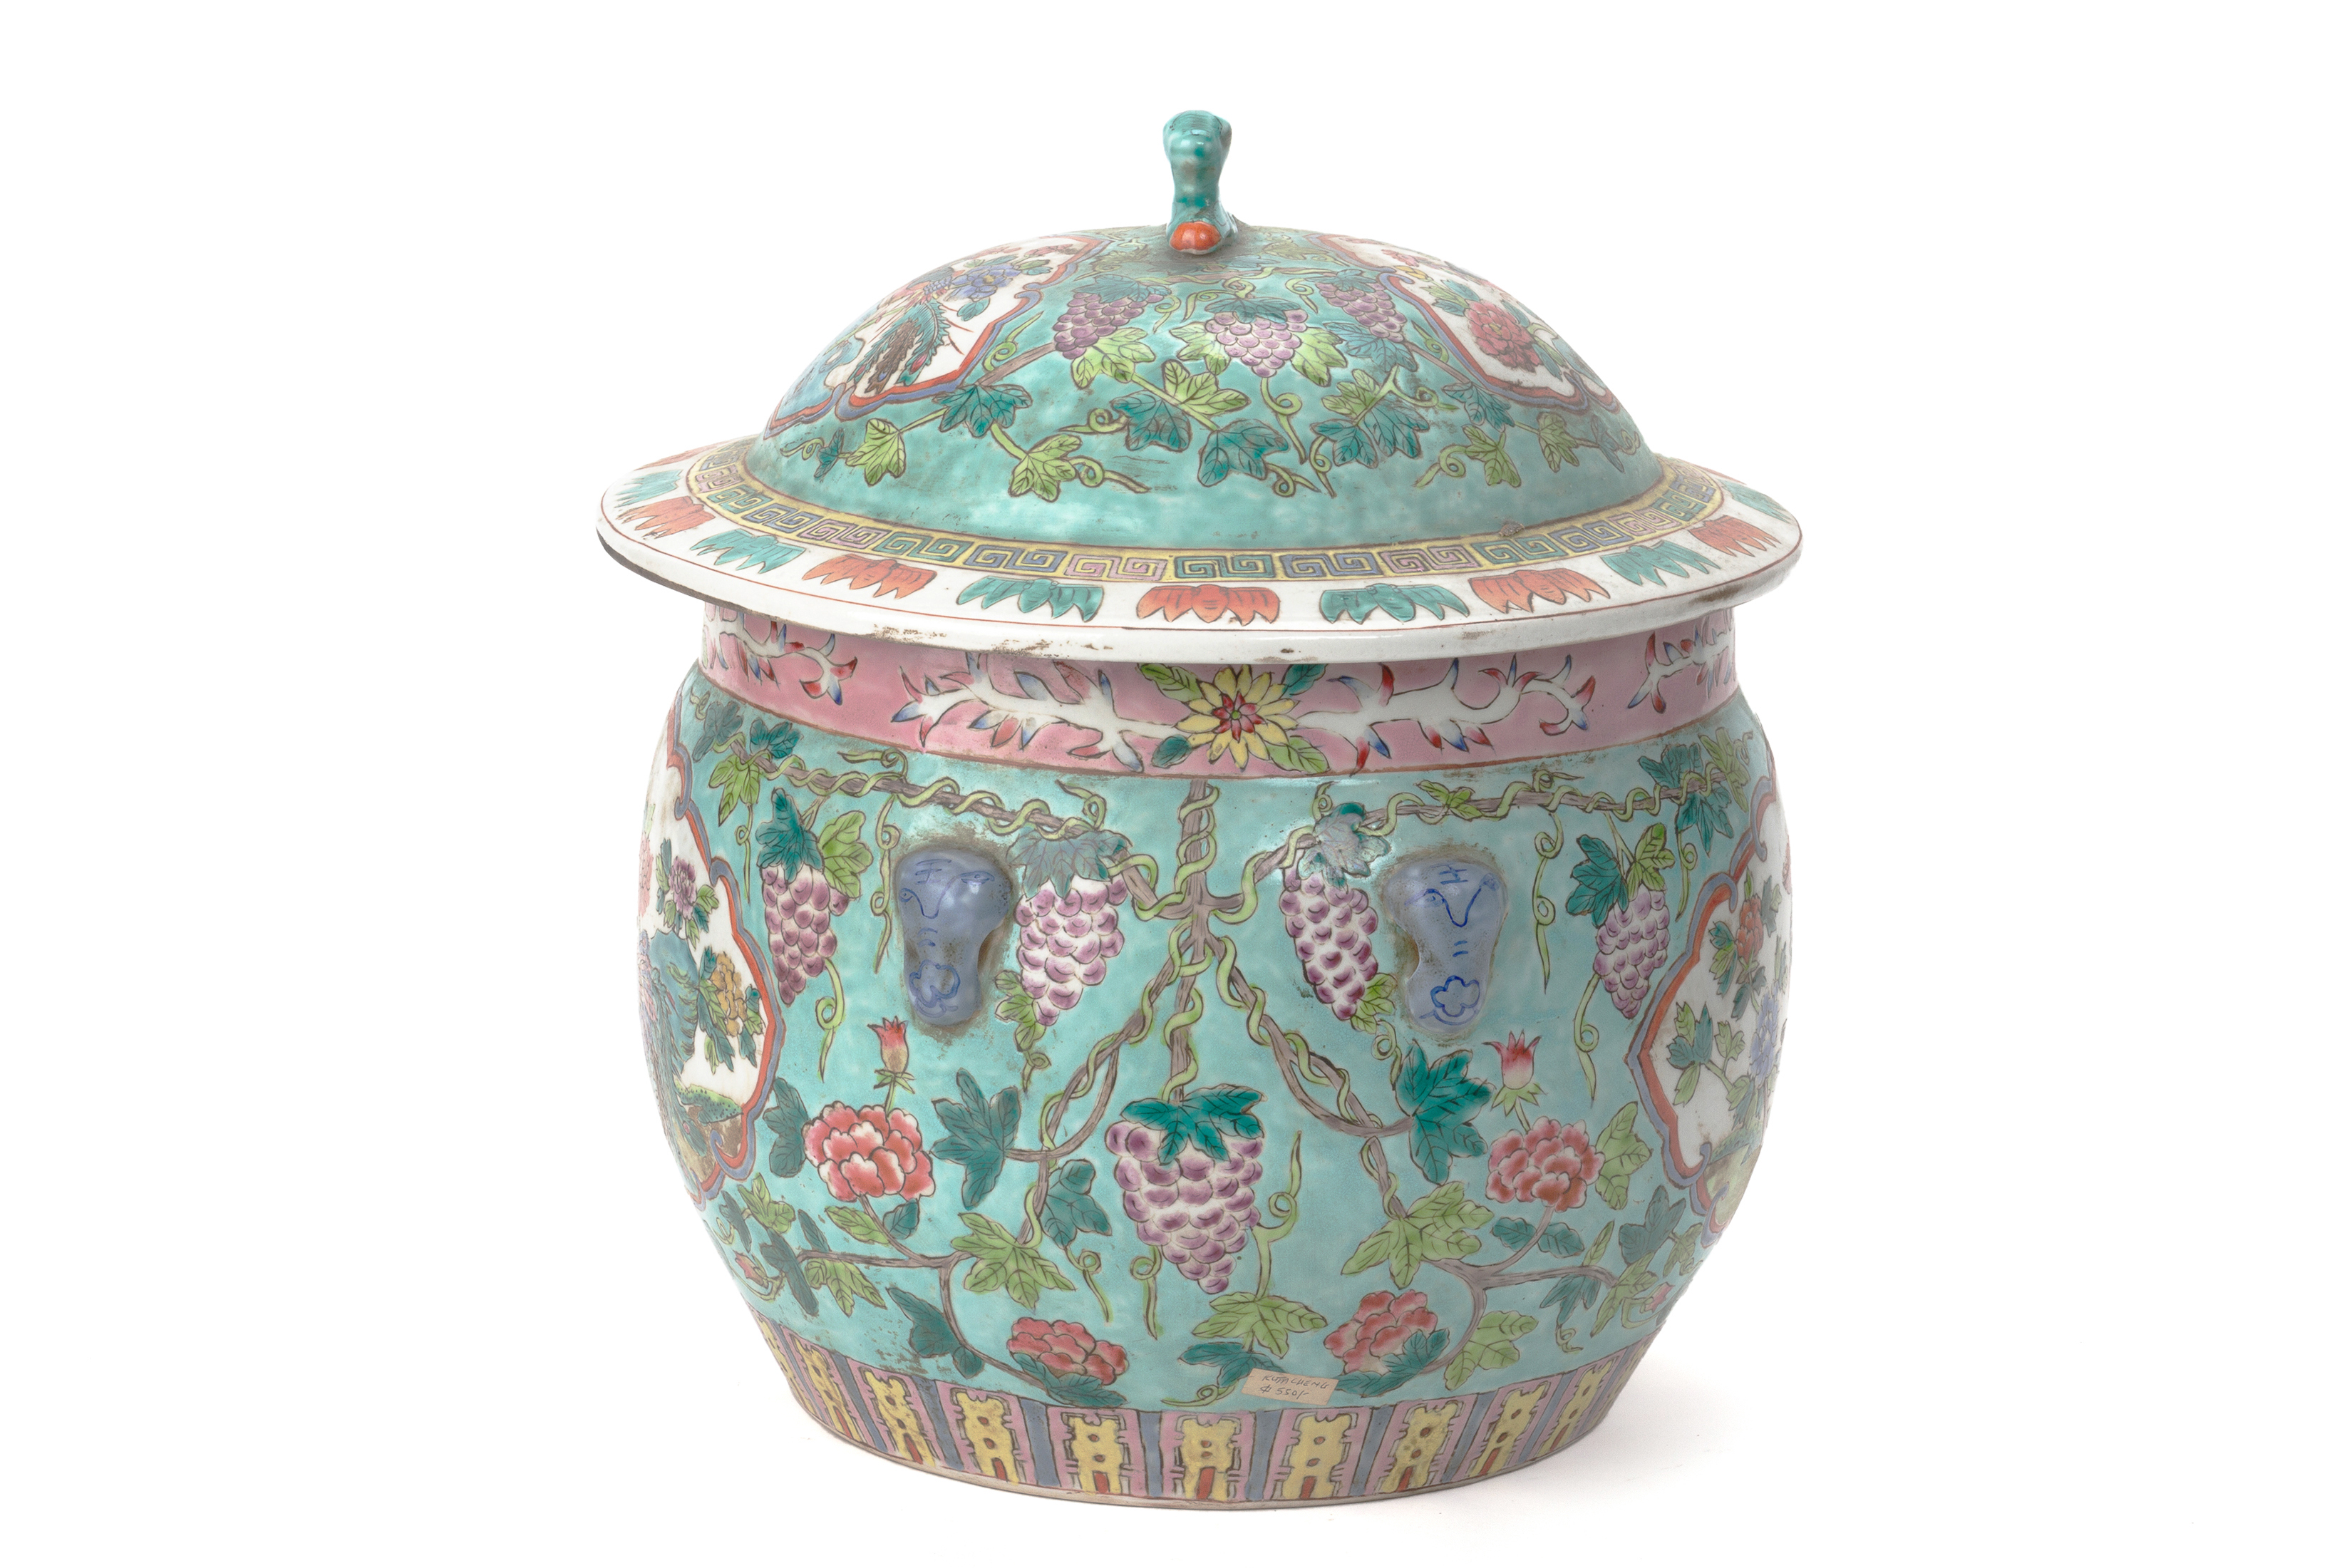 A LARGE TURQUOISE GROUND MODERN PERANAKAN STYLE KAMCHENG - Image 2 of 4